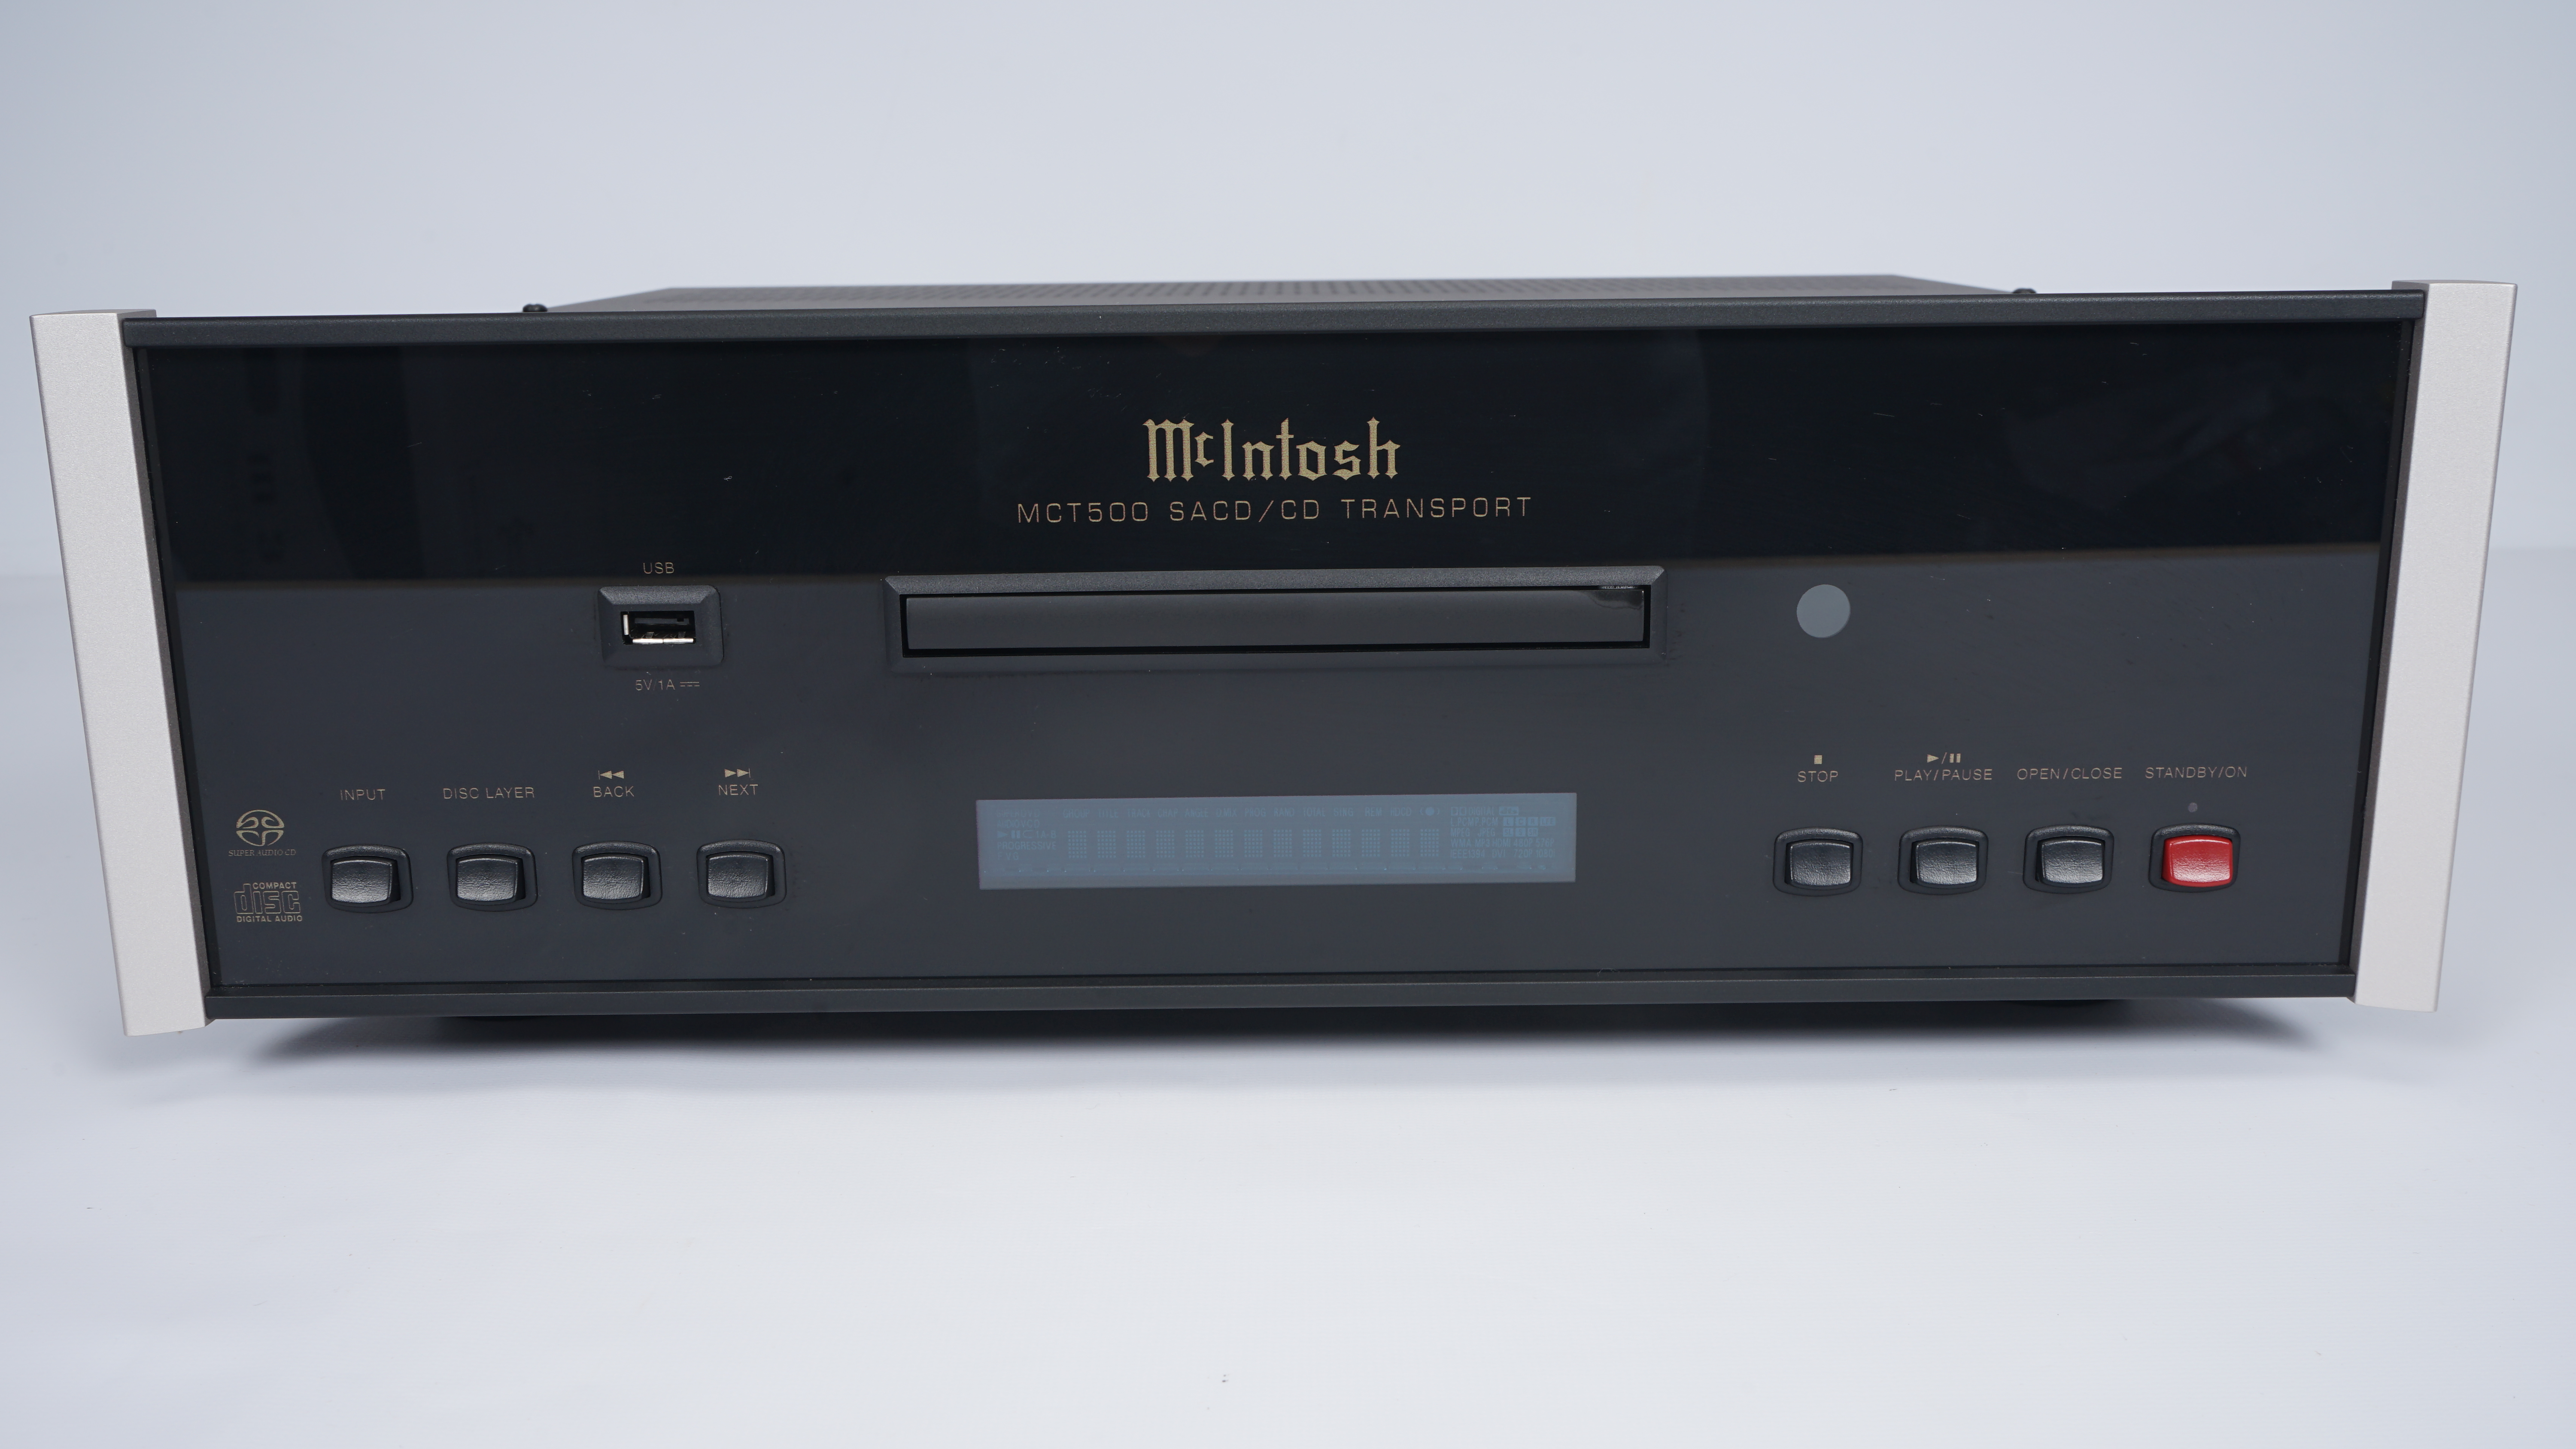 McIntosh MCT 500 – High End Stereo Equipment We Buy